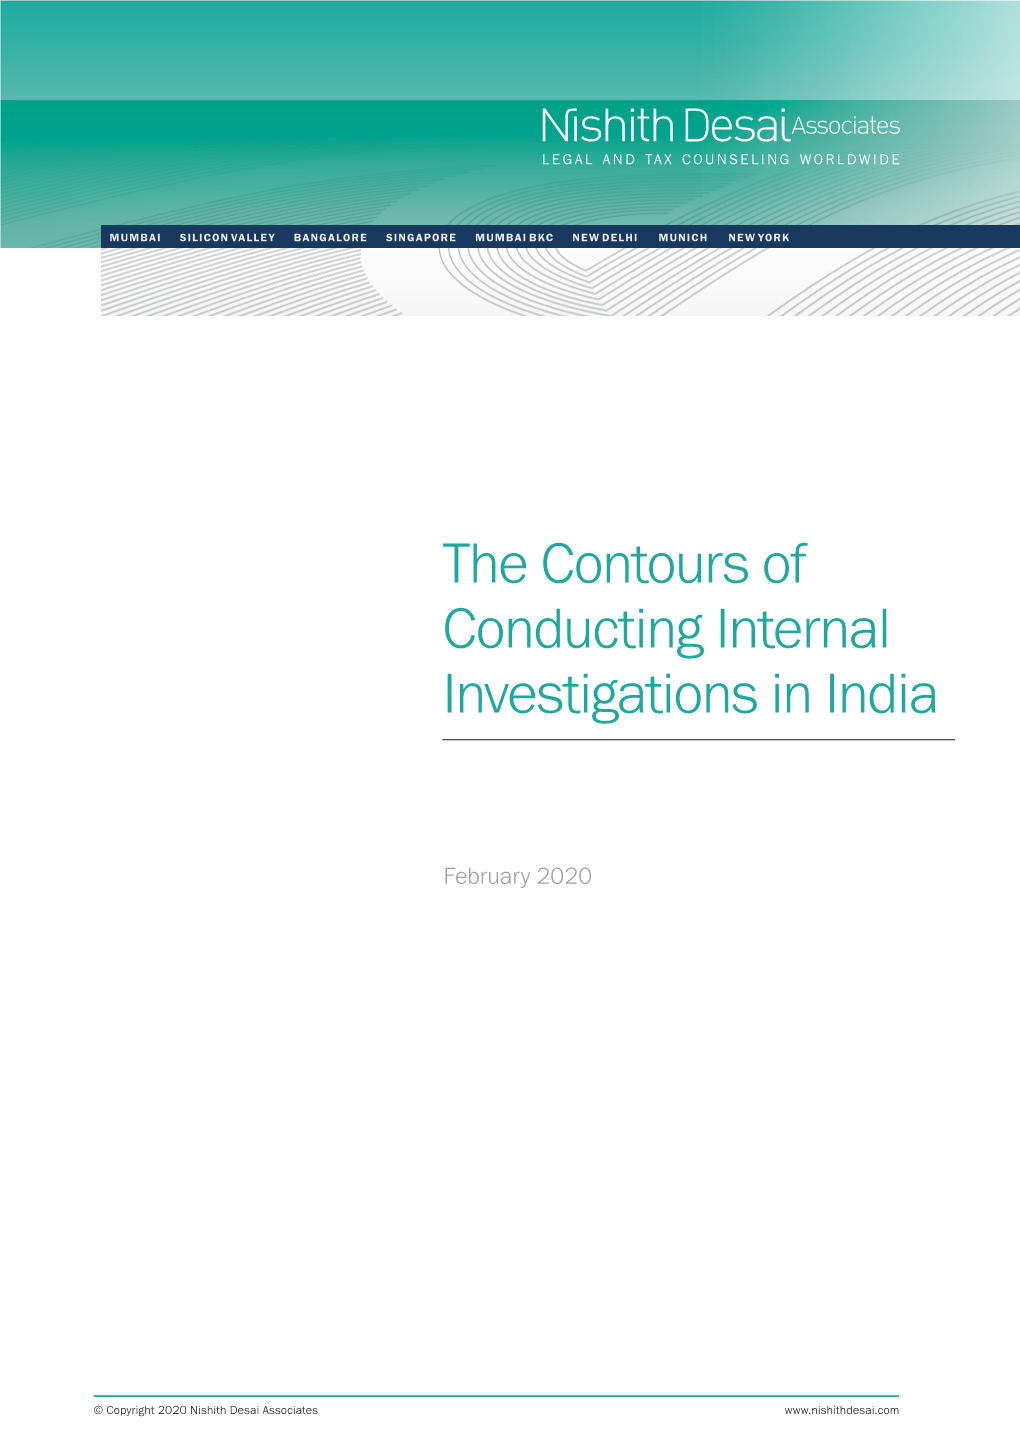 The Contours of Conducting Internal Investigations in India